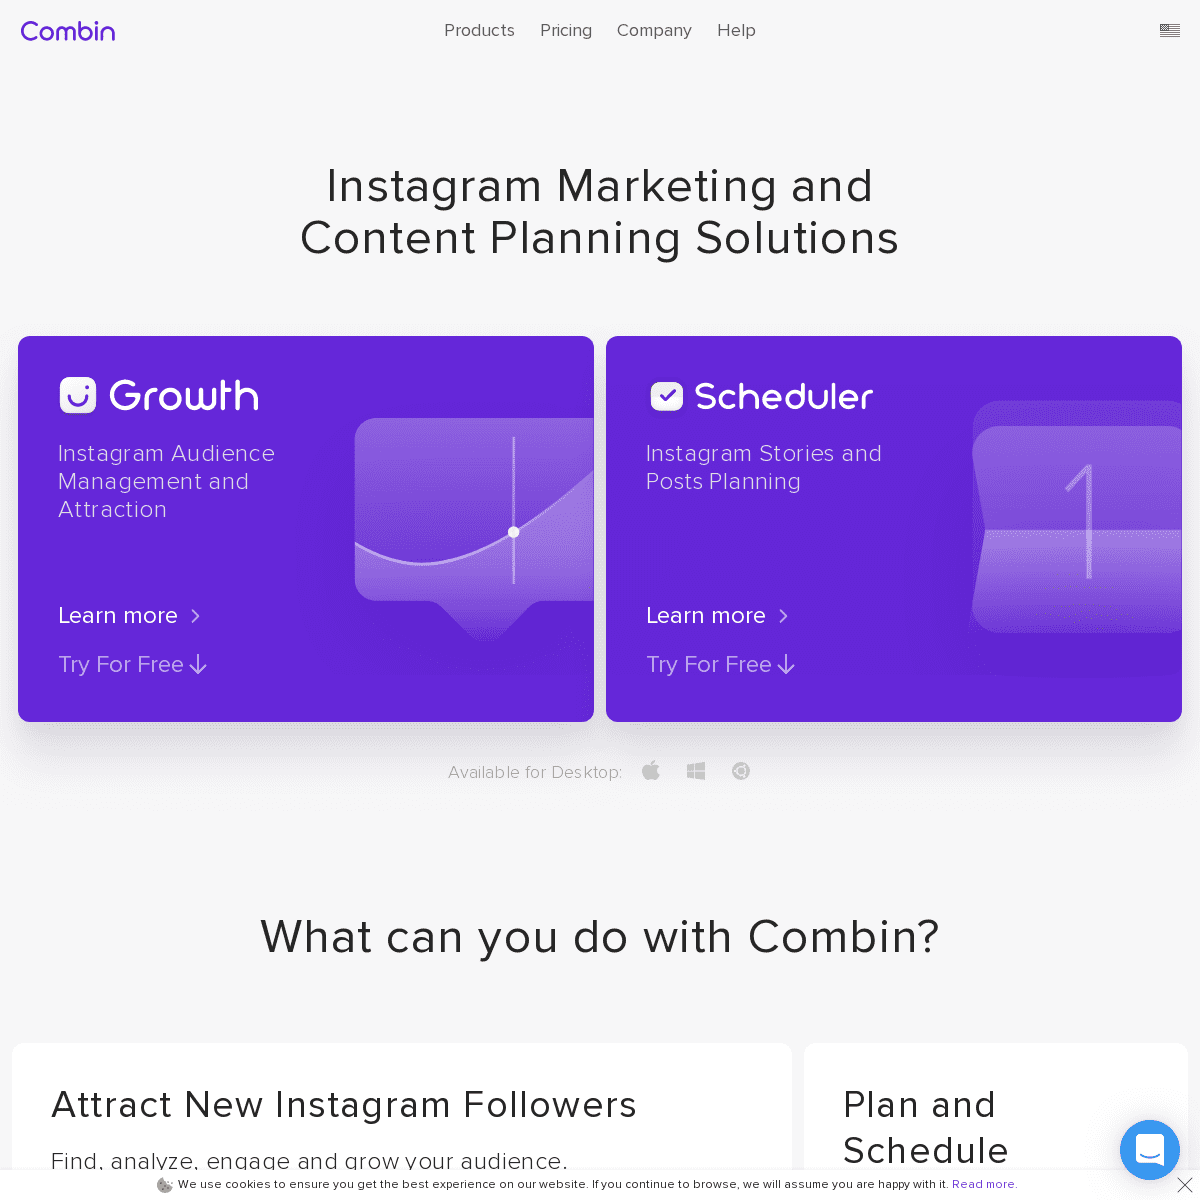 A complete backup of combin.com